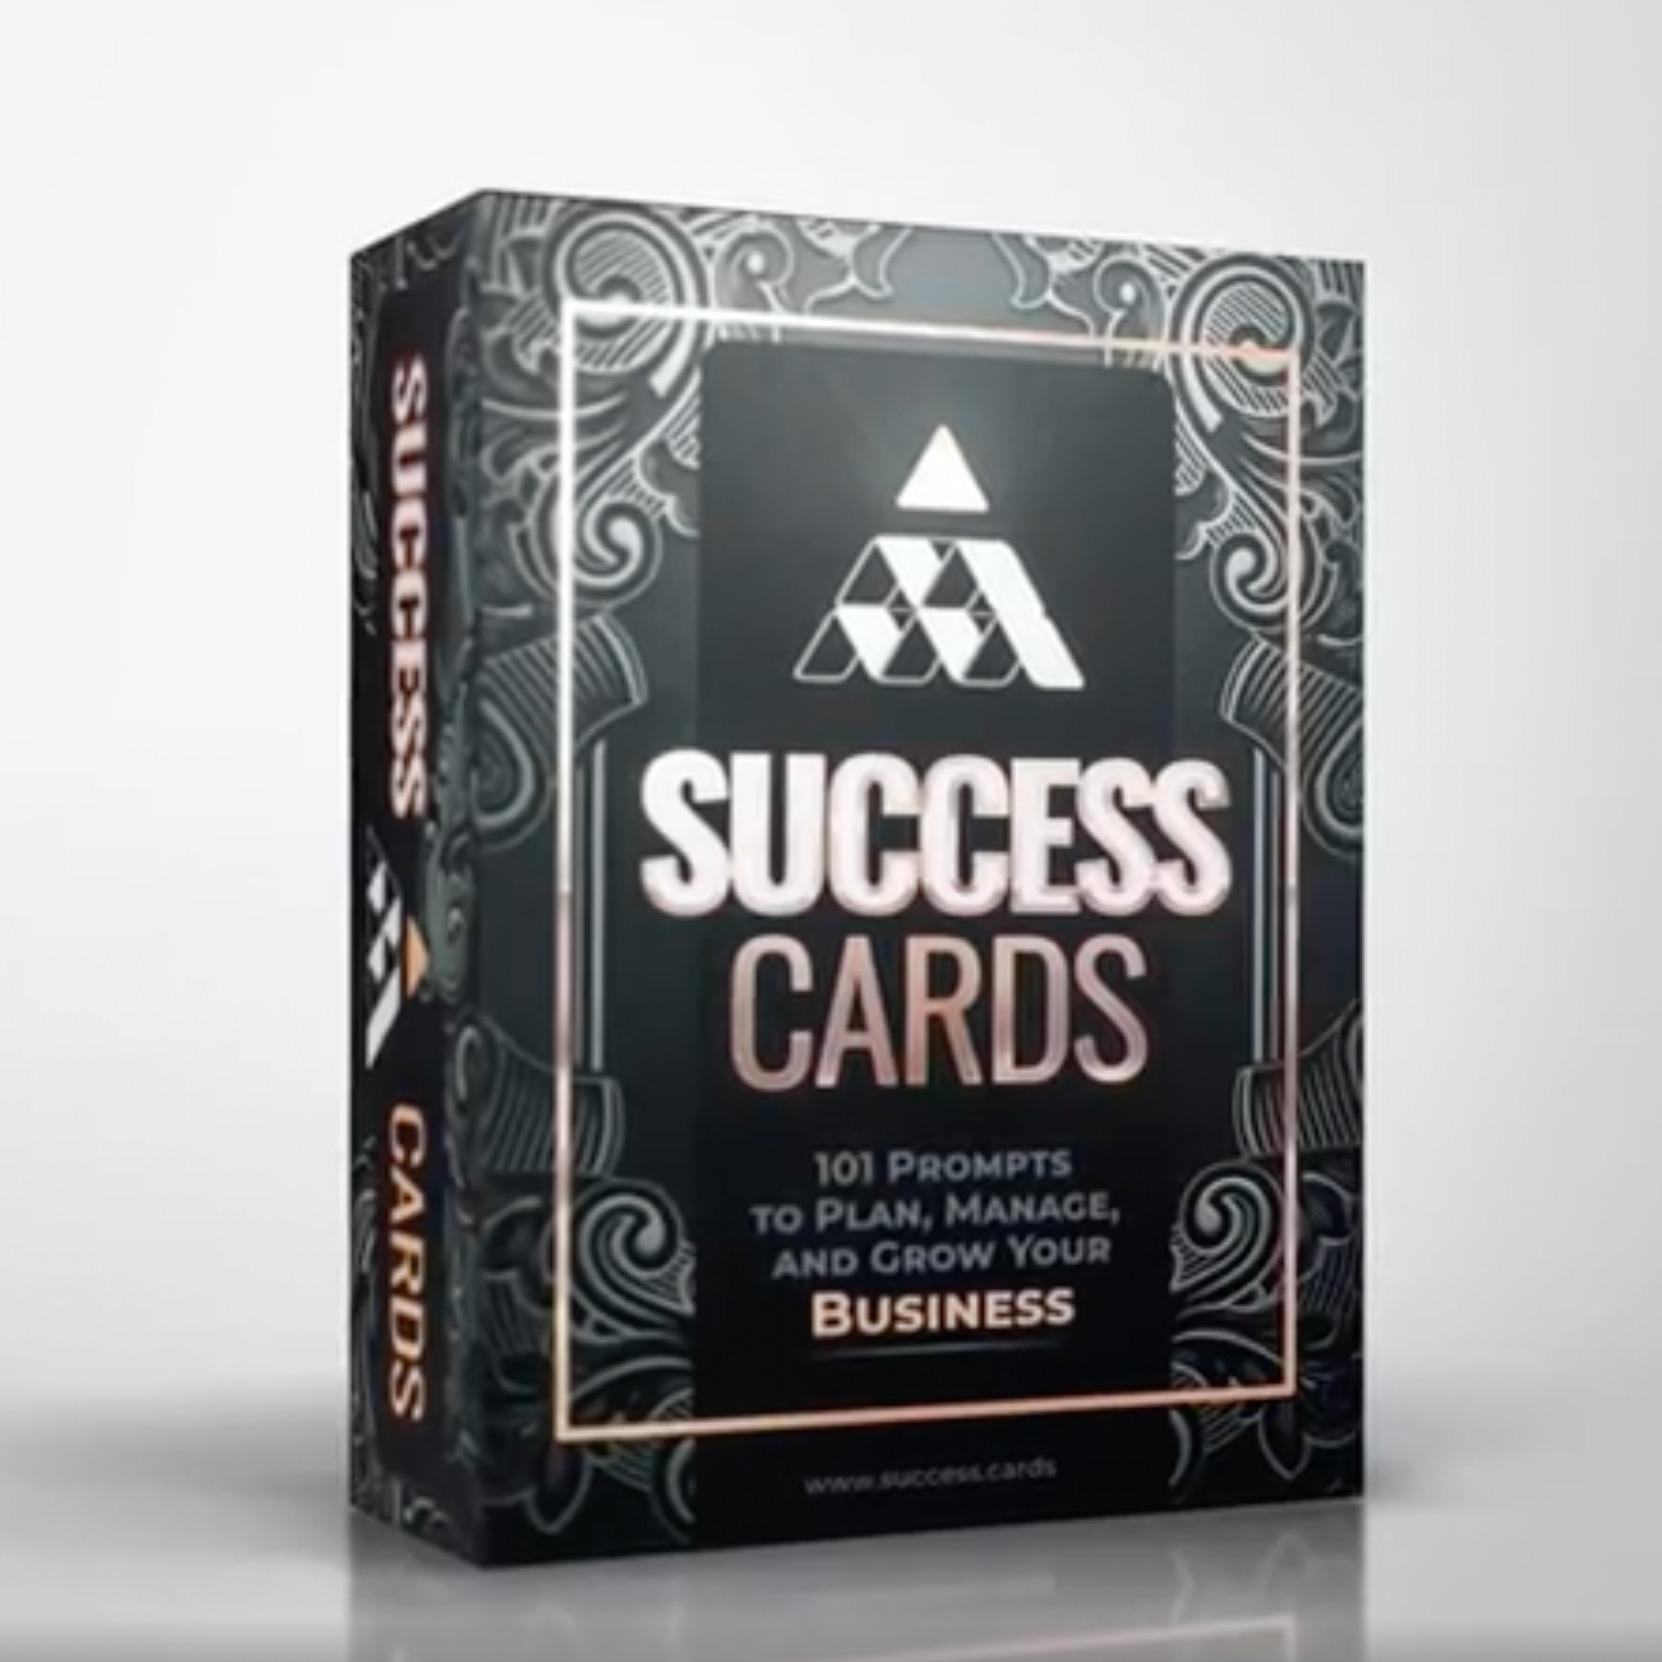 MBA in Box: Expert Business Advice A-Z by Success Cards